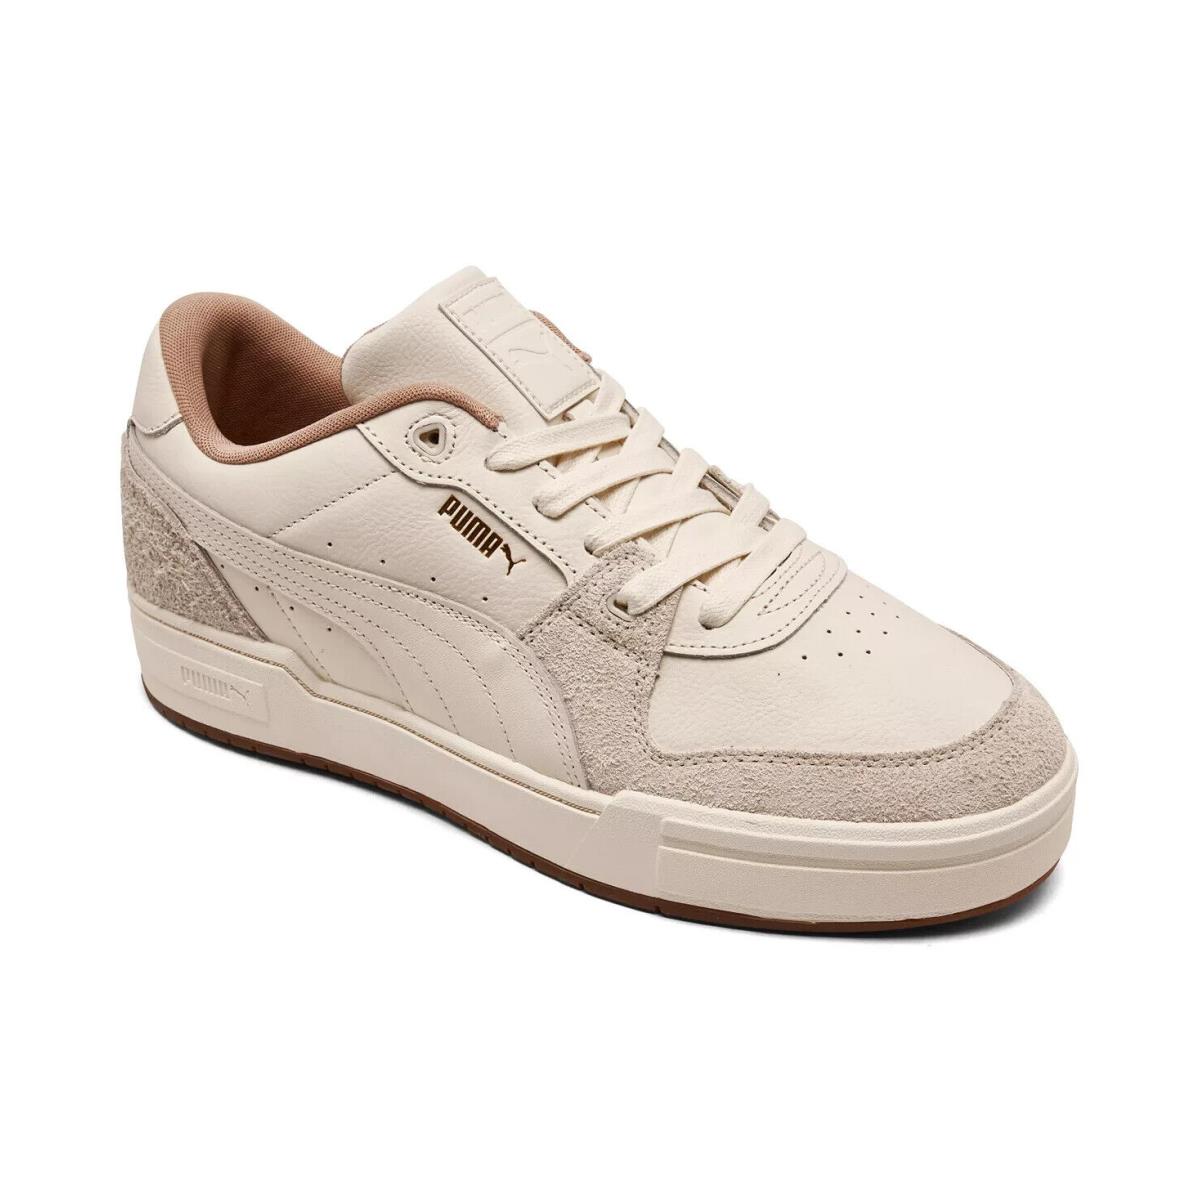 Puma N55106 Men`s White Leather Ca Pro Lux Casual Sneakers Size 8.5